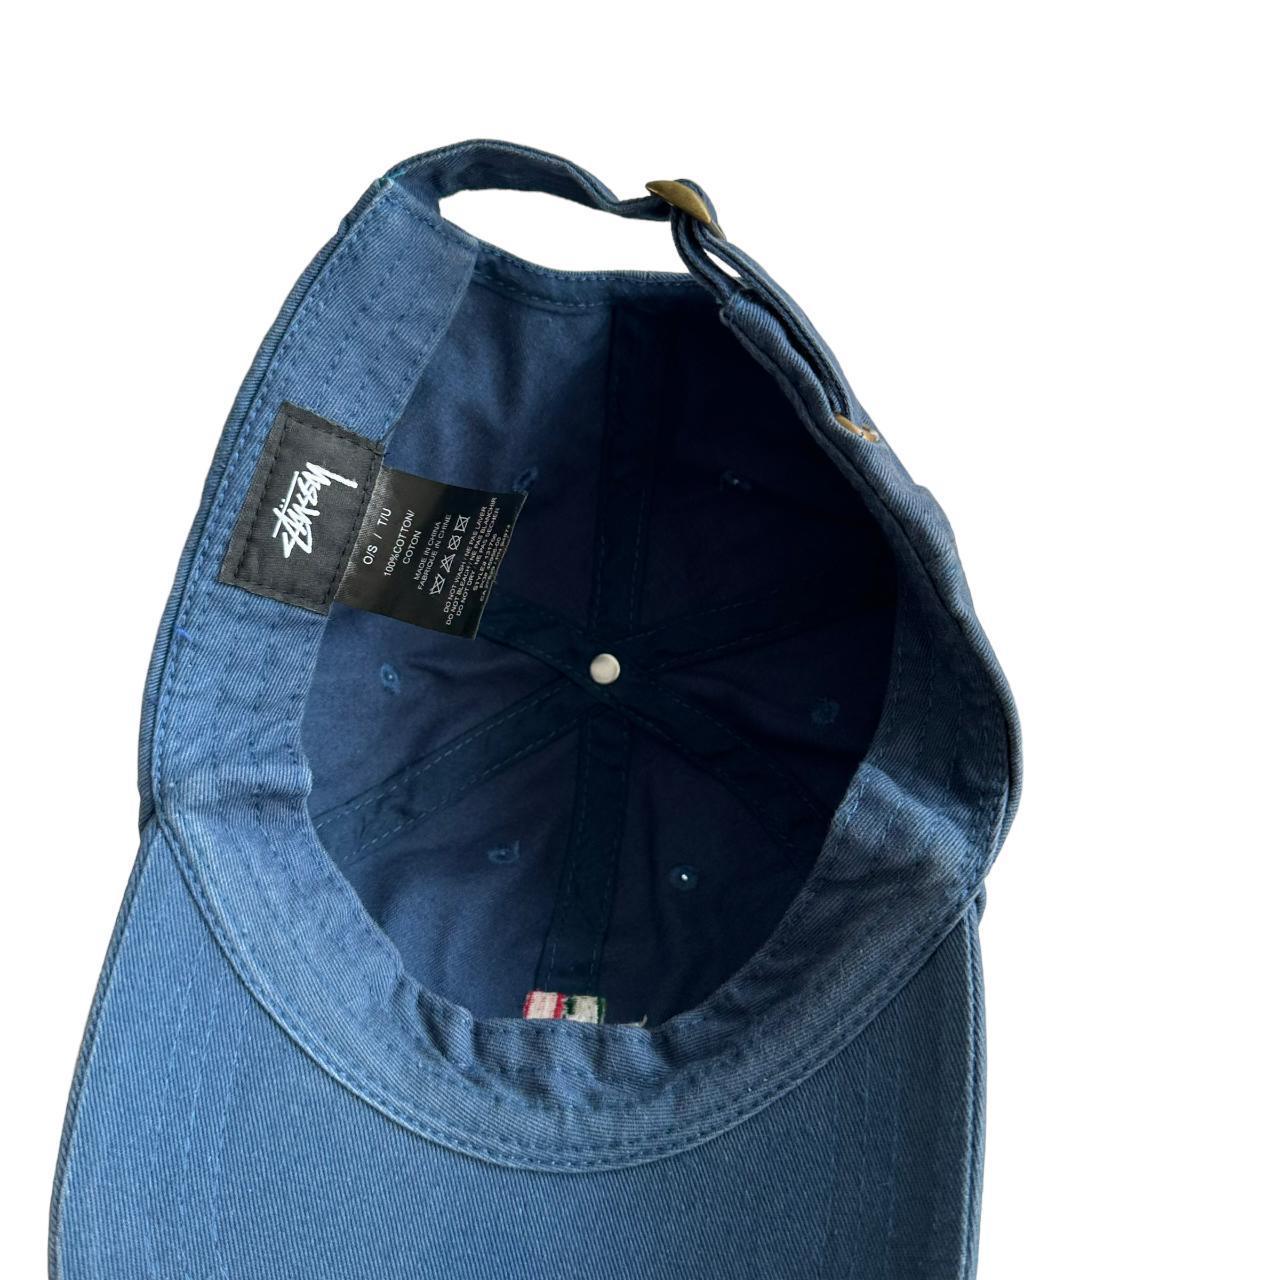 Stussy navy style Hat - Known Source